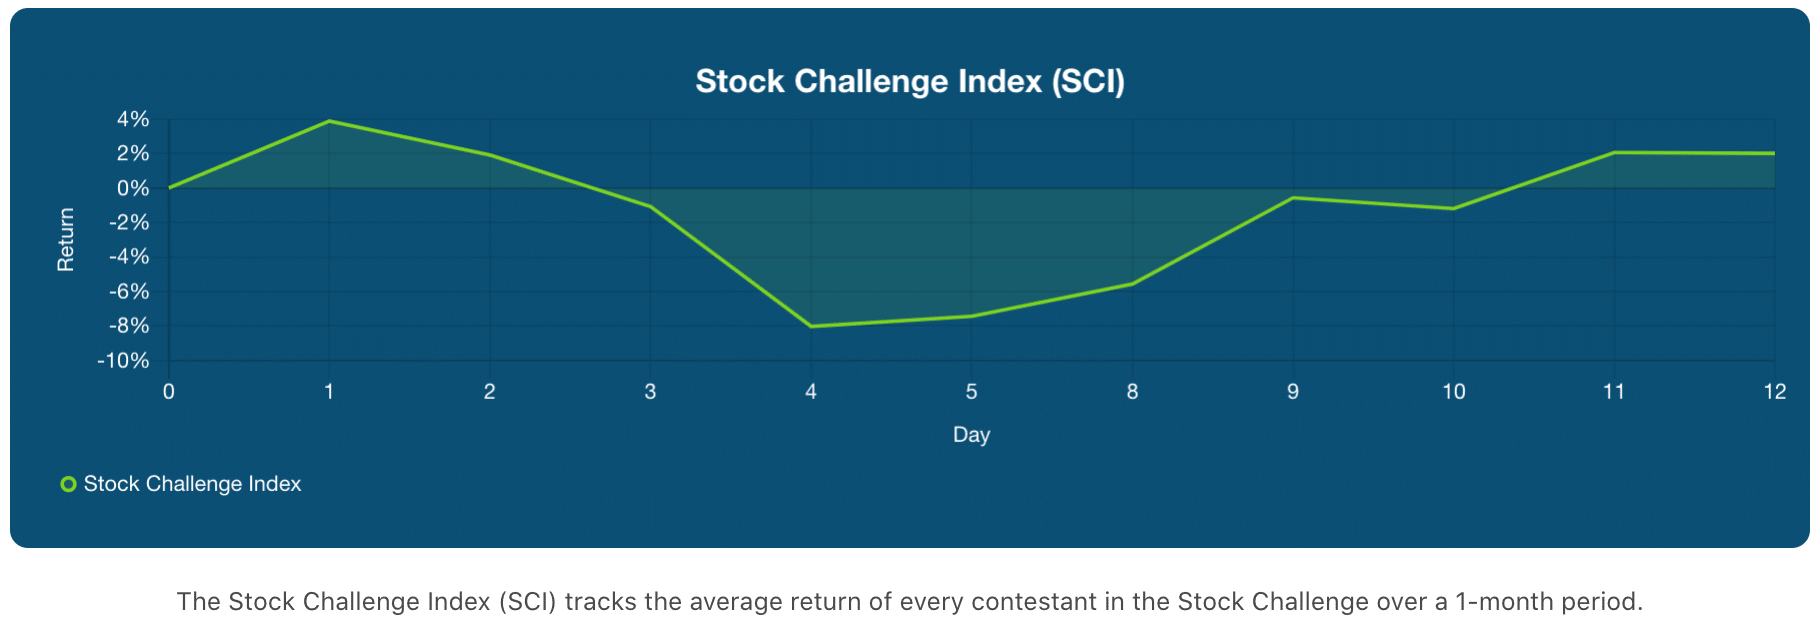 stock challenge index (SCI) as of March 12, 2021